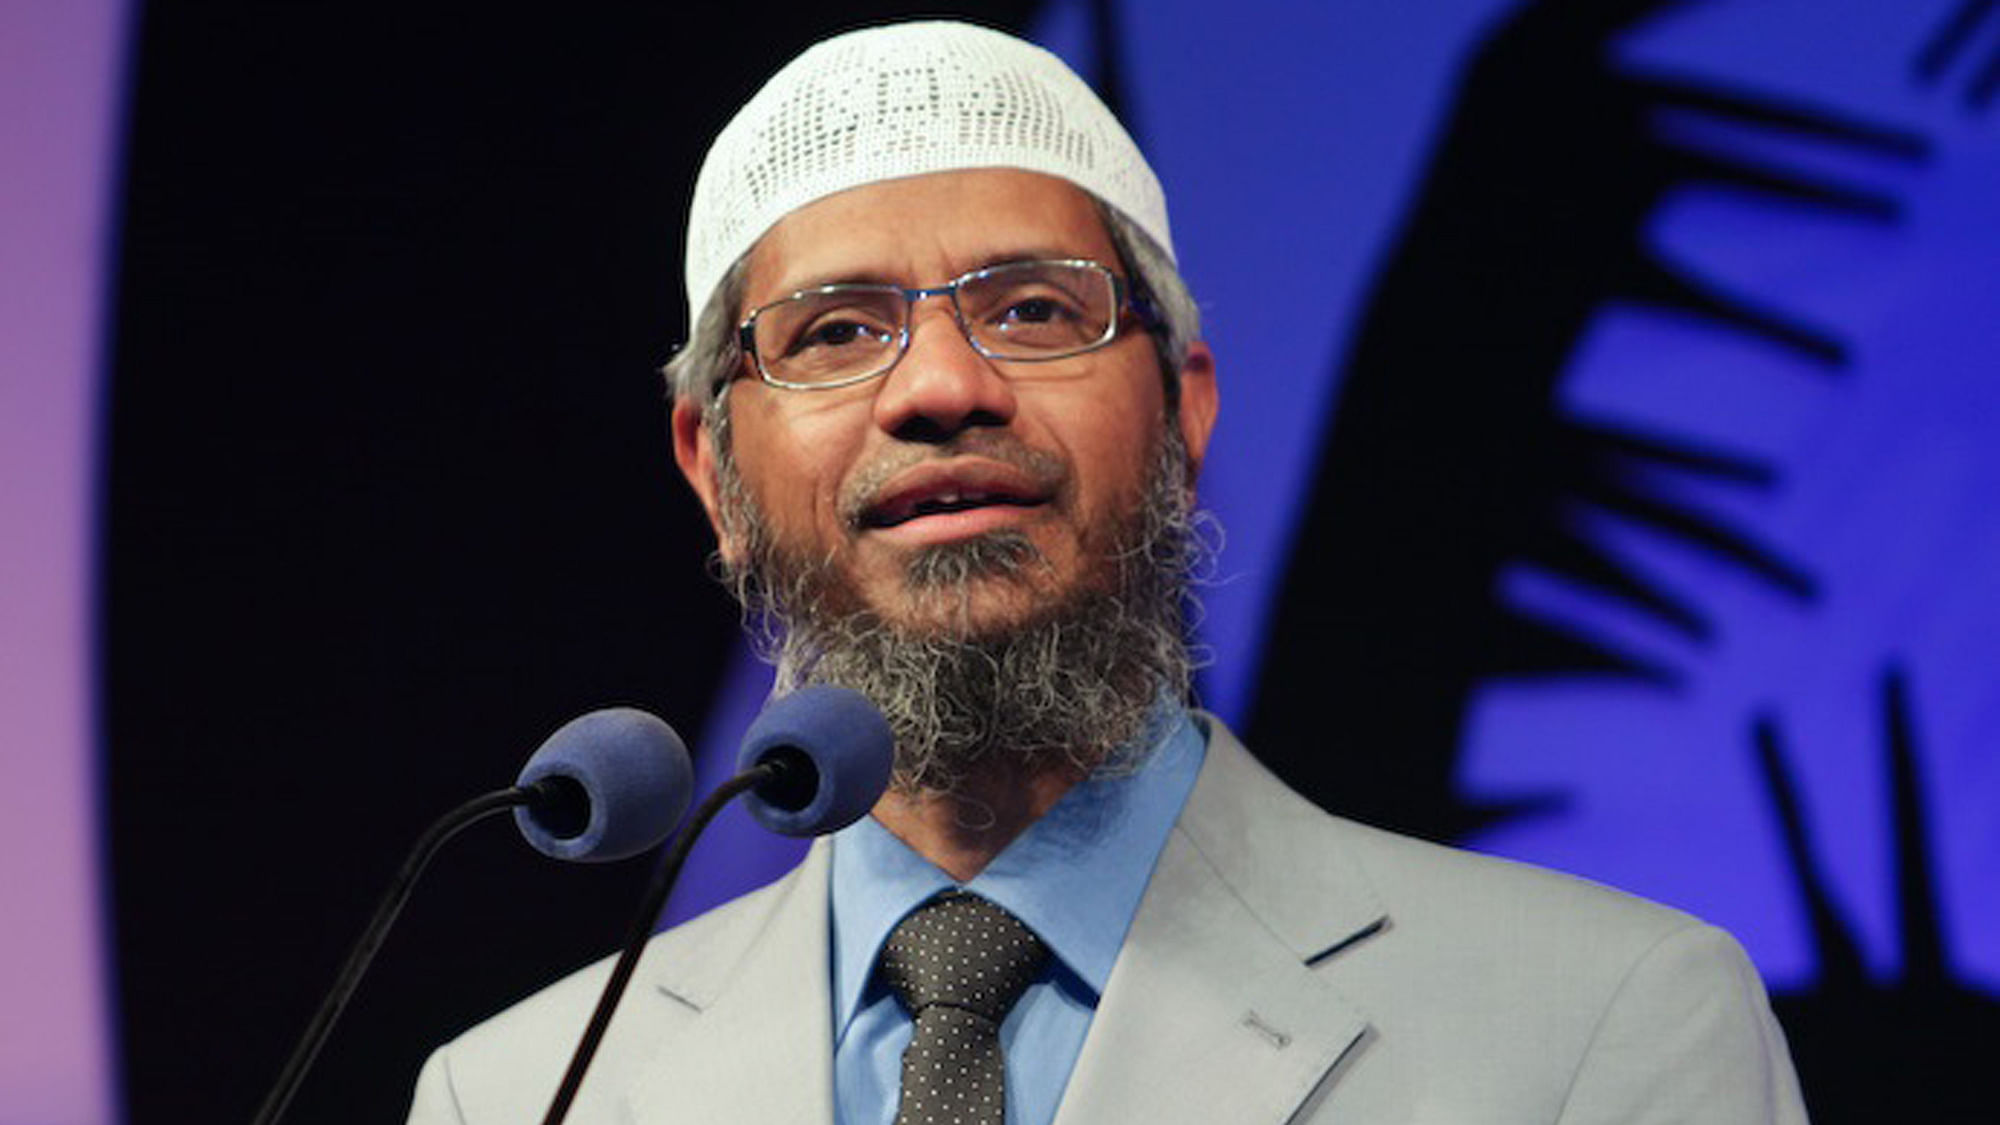 Zakir Naik has been under fire ever since it was revealed that one of the Dhaka attackers was his follower. (Photo Courtesy: The News Minute)